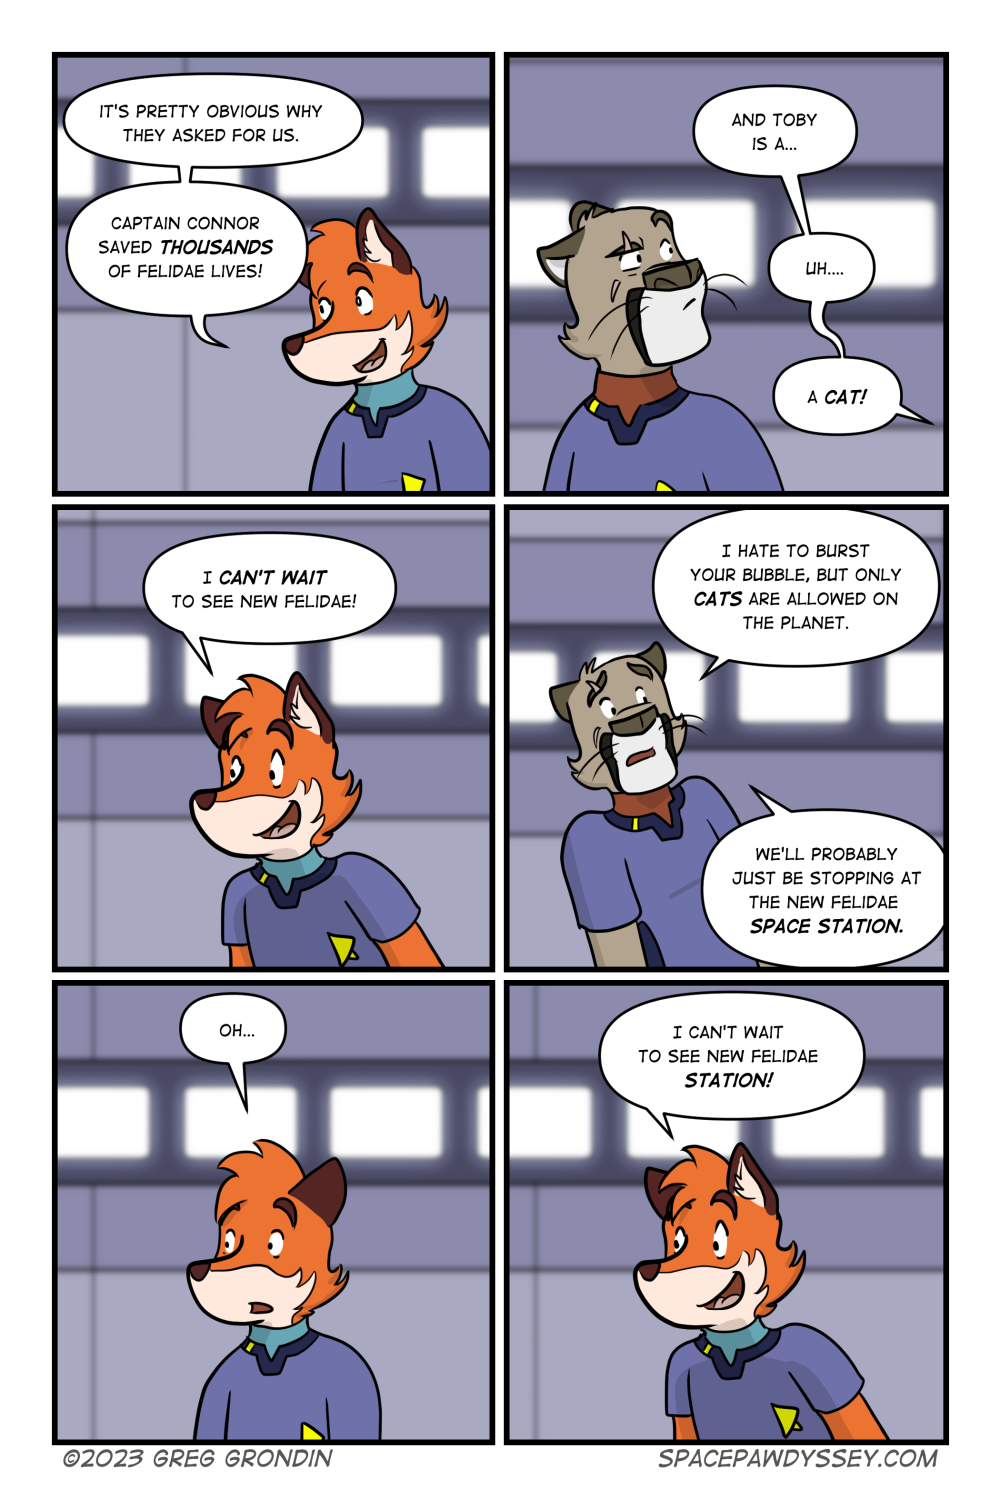 Space Pawdyssey #646